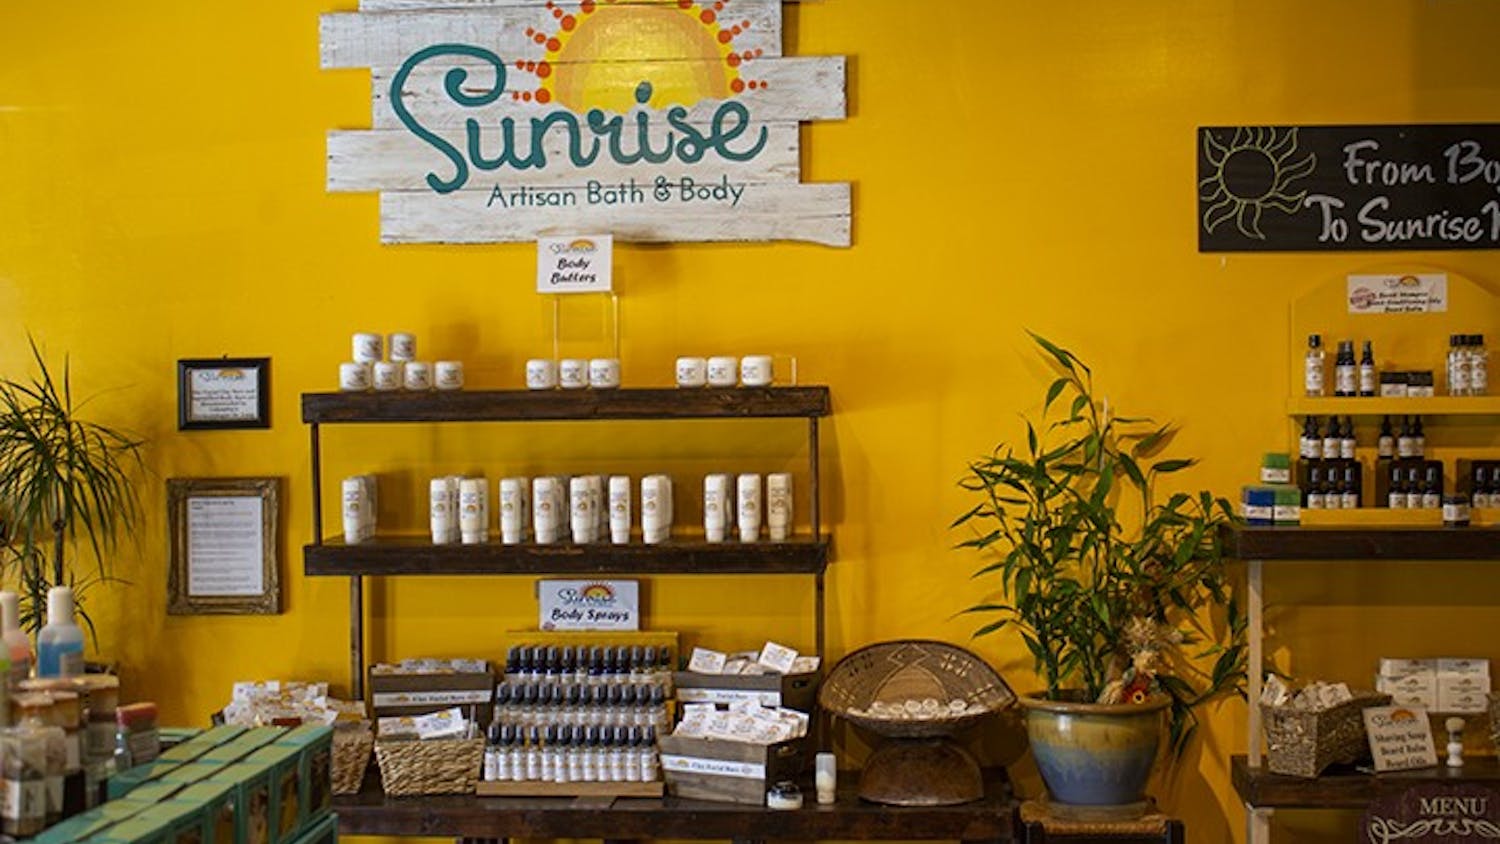 Sunrise Artisan Bath and Body, located in Five Points, has a range of body care items for sale, such as body sprays and body butters, all created by artisan Tzima Brown.